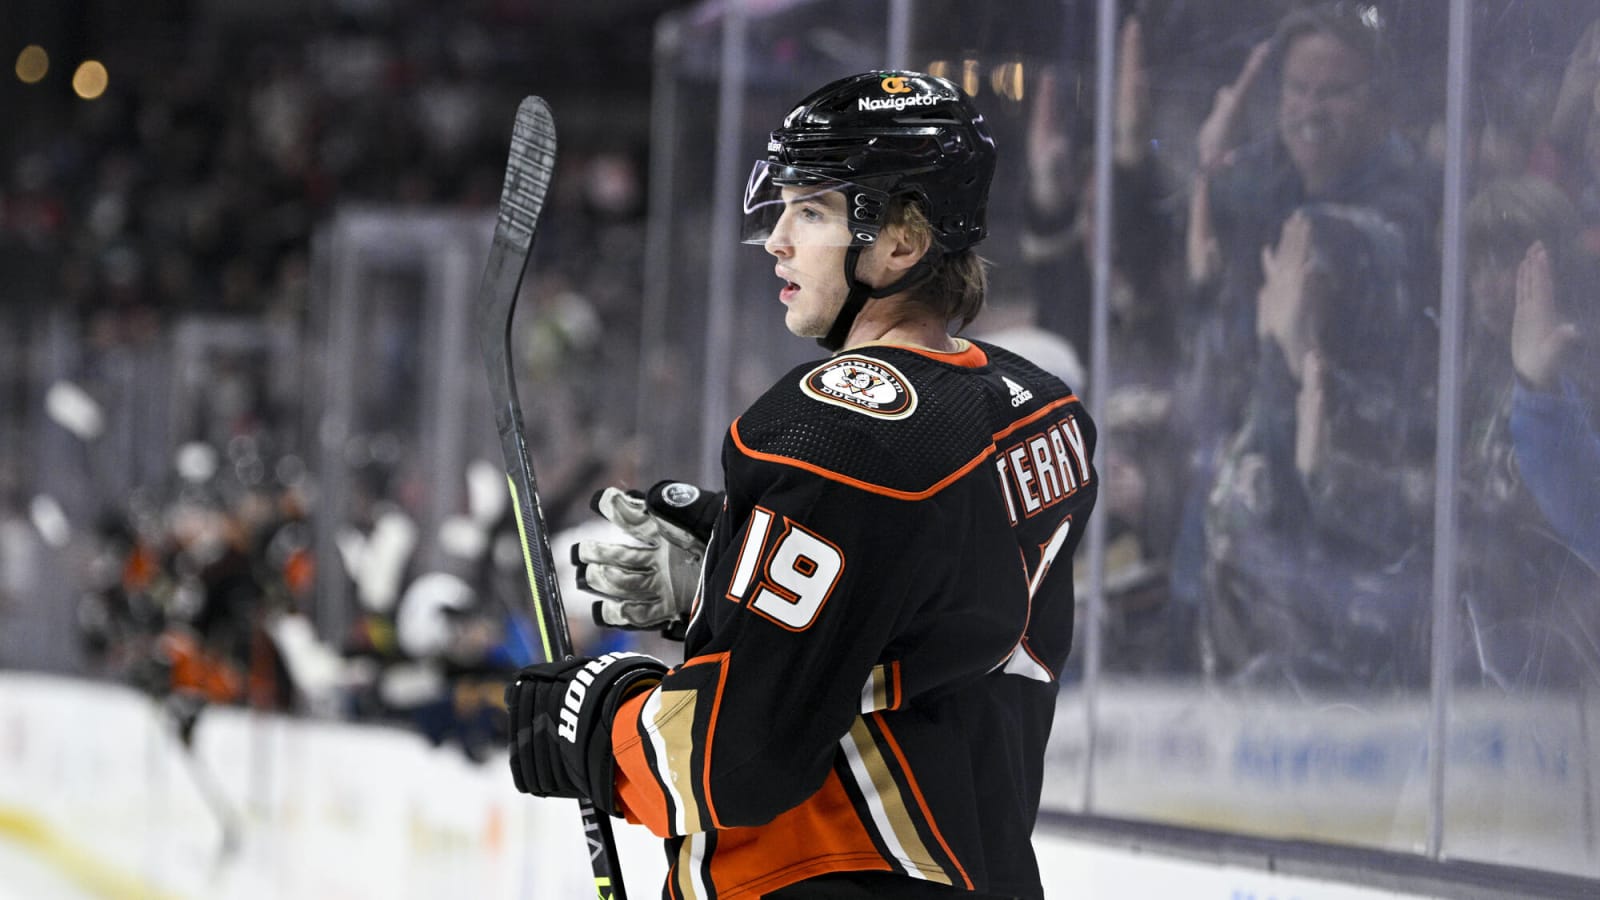 Ducks Fans Shouldn’t Worry About Terry’s Arbitration